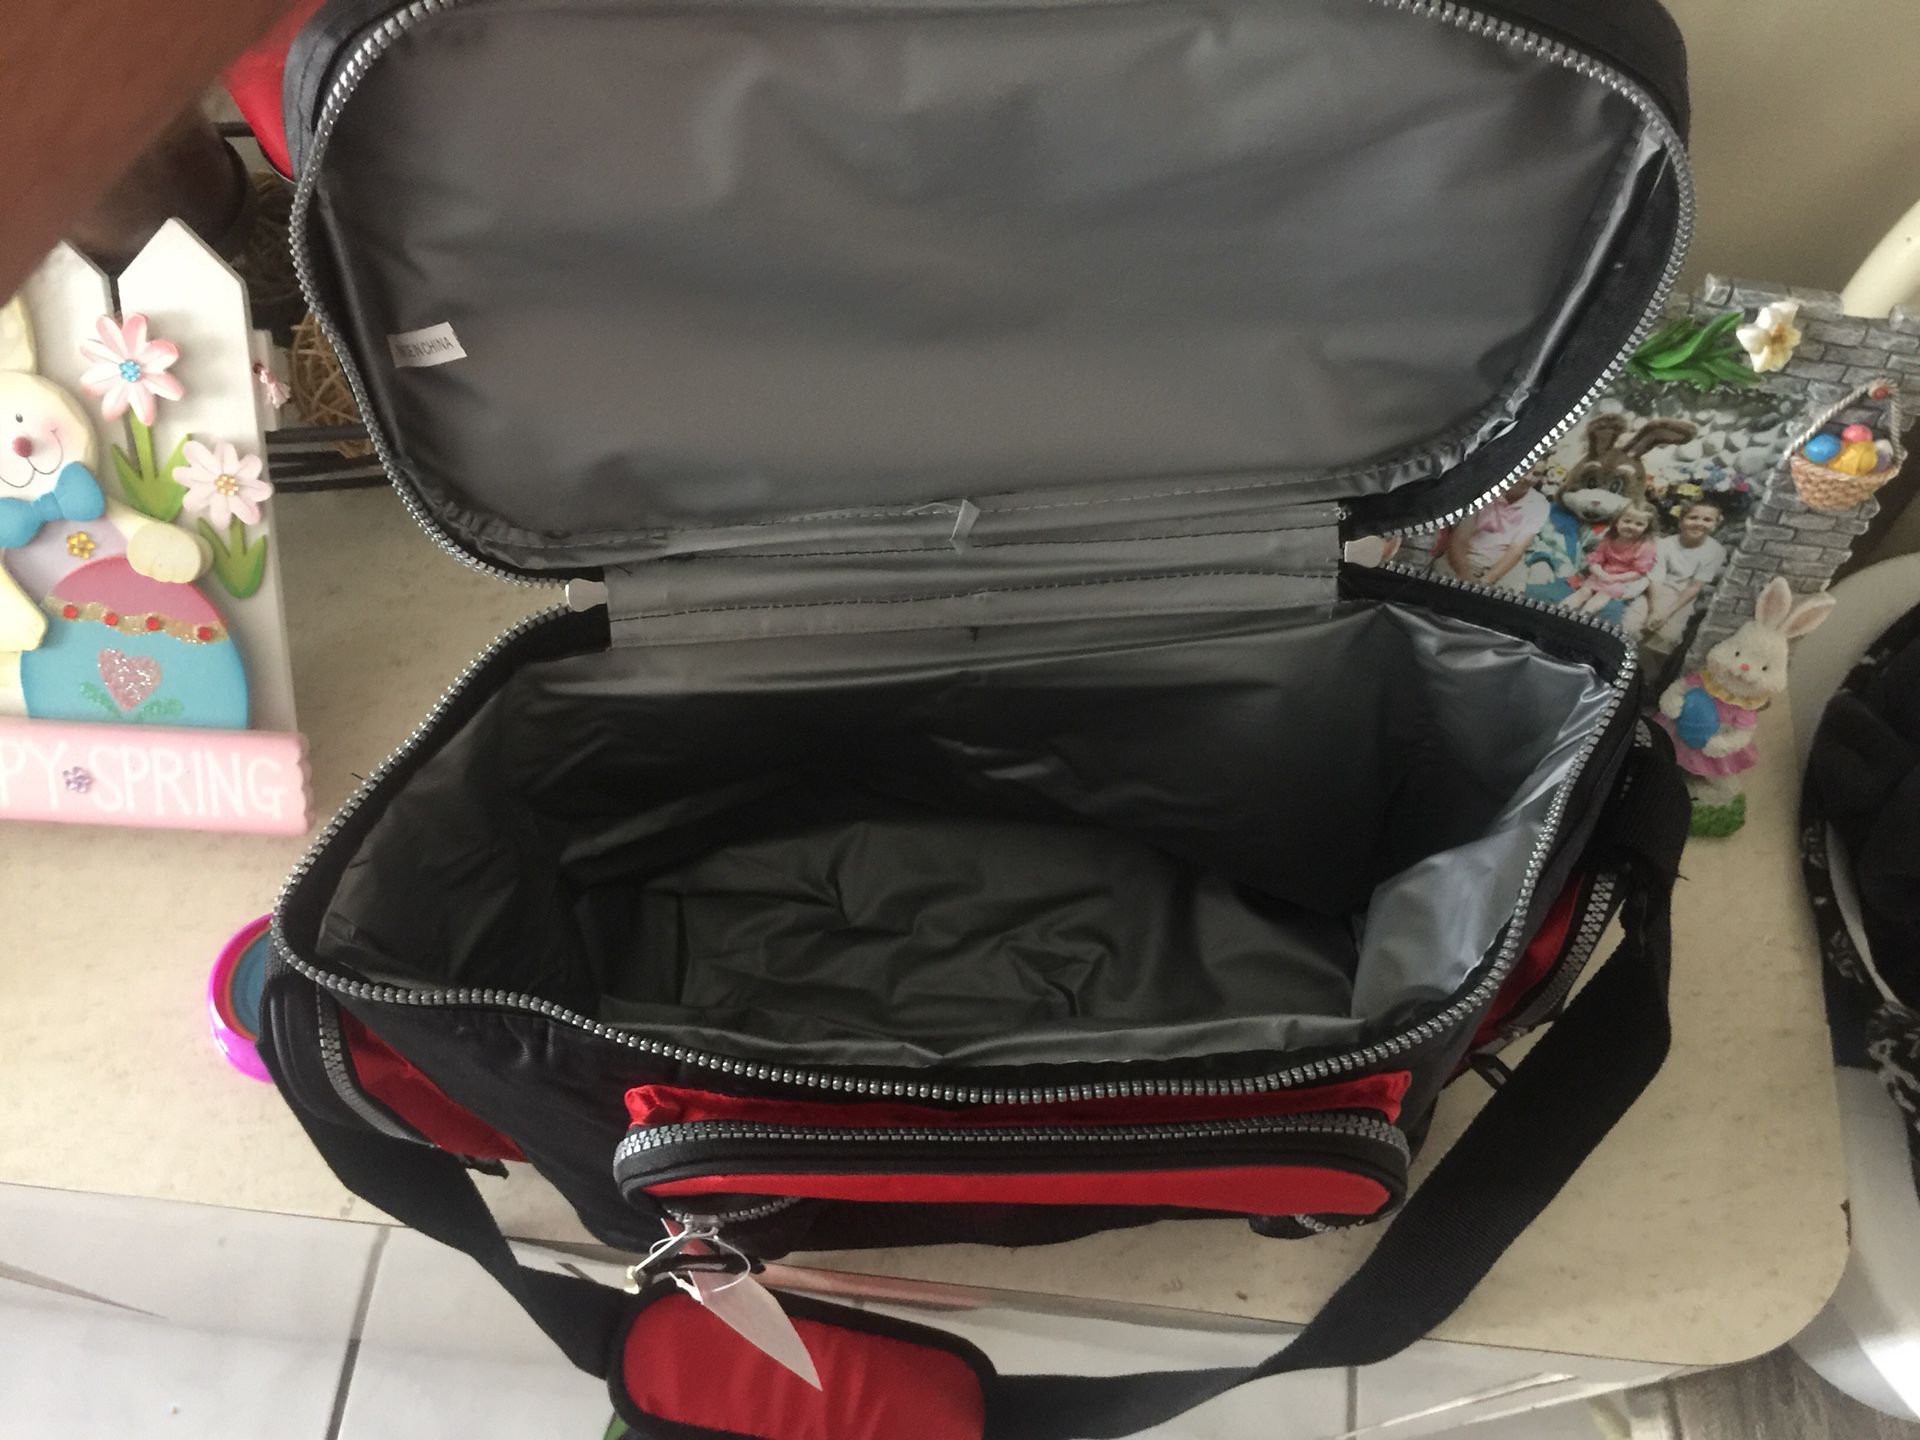 WWE backpack for Sale in Boca Raton, FL - OfferUp